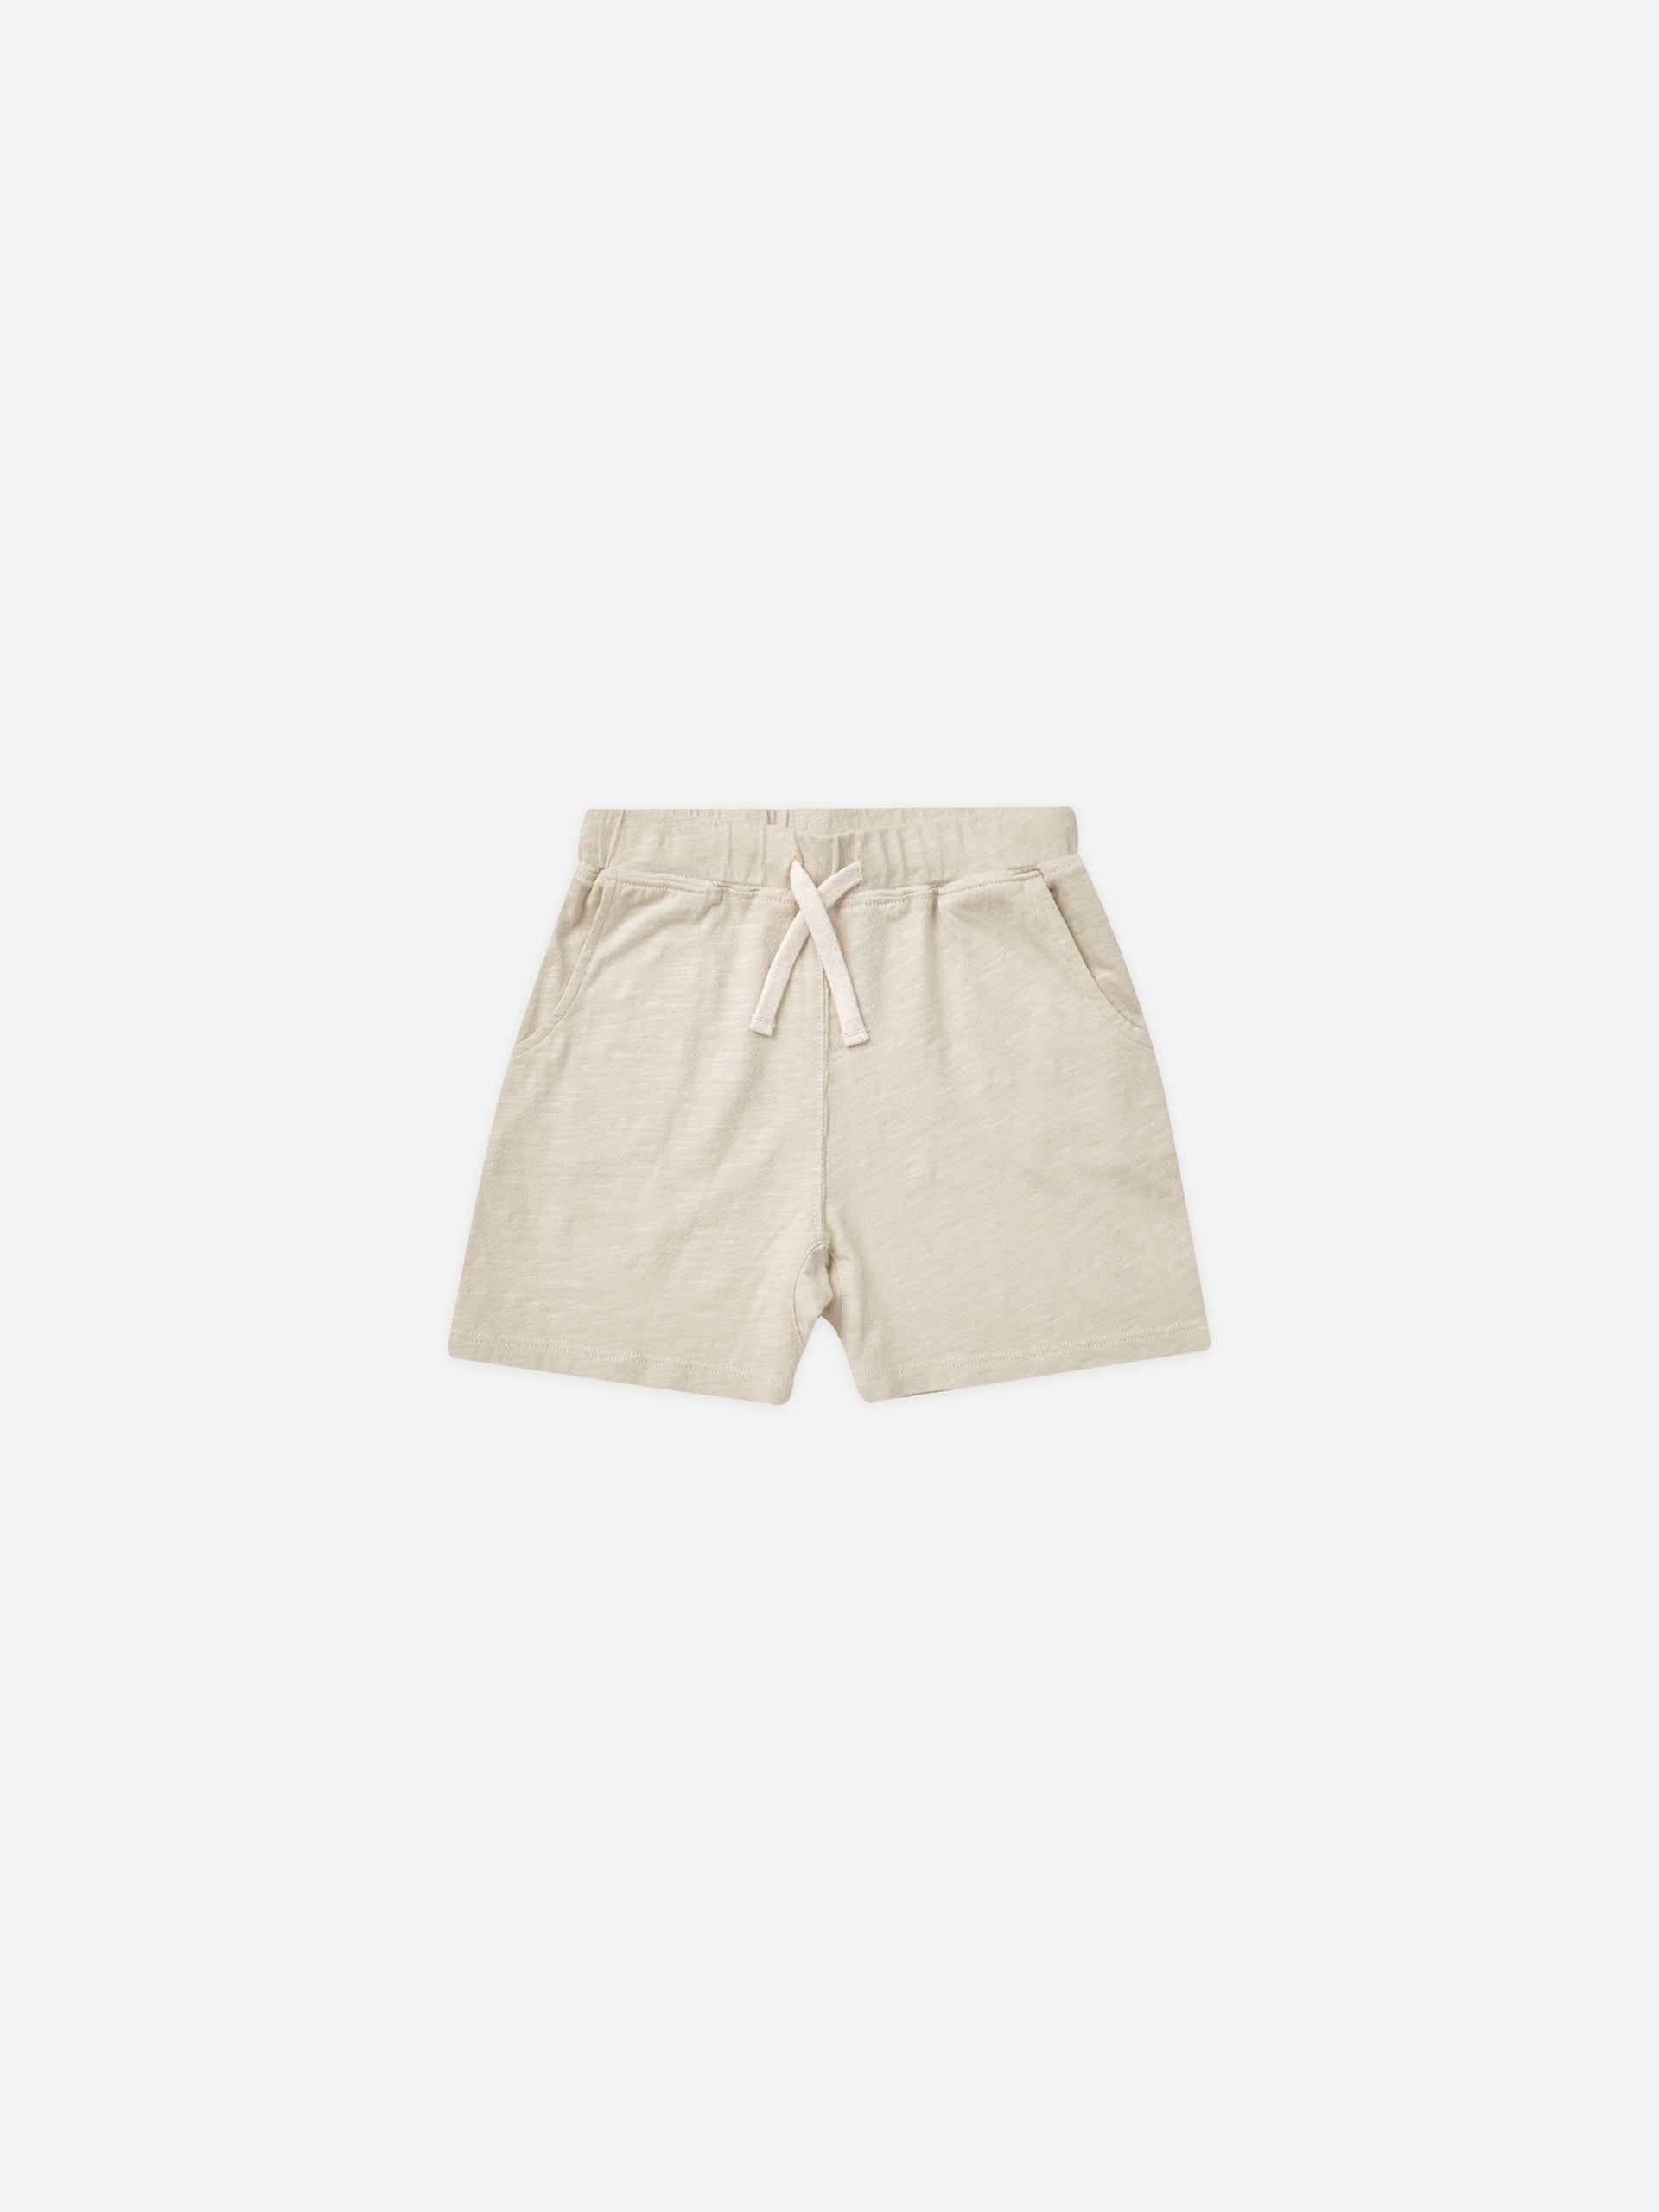 Sam Short || Dove - Rylee + Cru | Kids Clothes | Trendy Baby Clothes | Modern Infant Outfits |